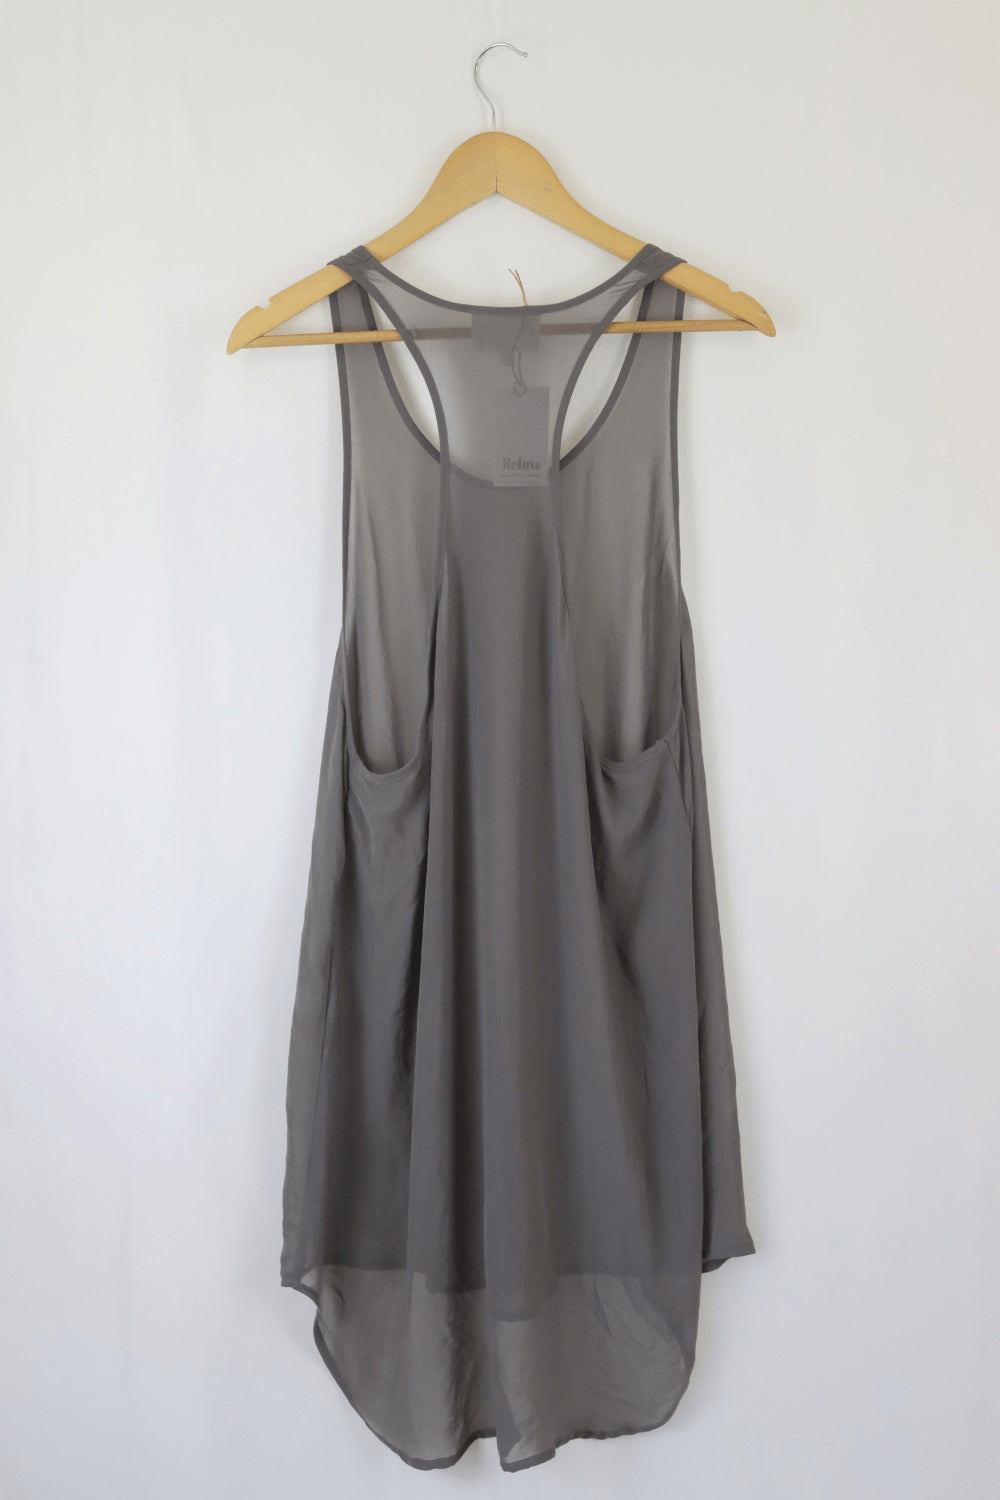 Life With Bird Charcoal Singlet 8